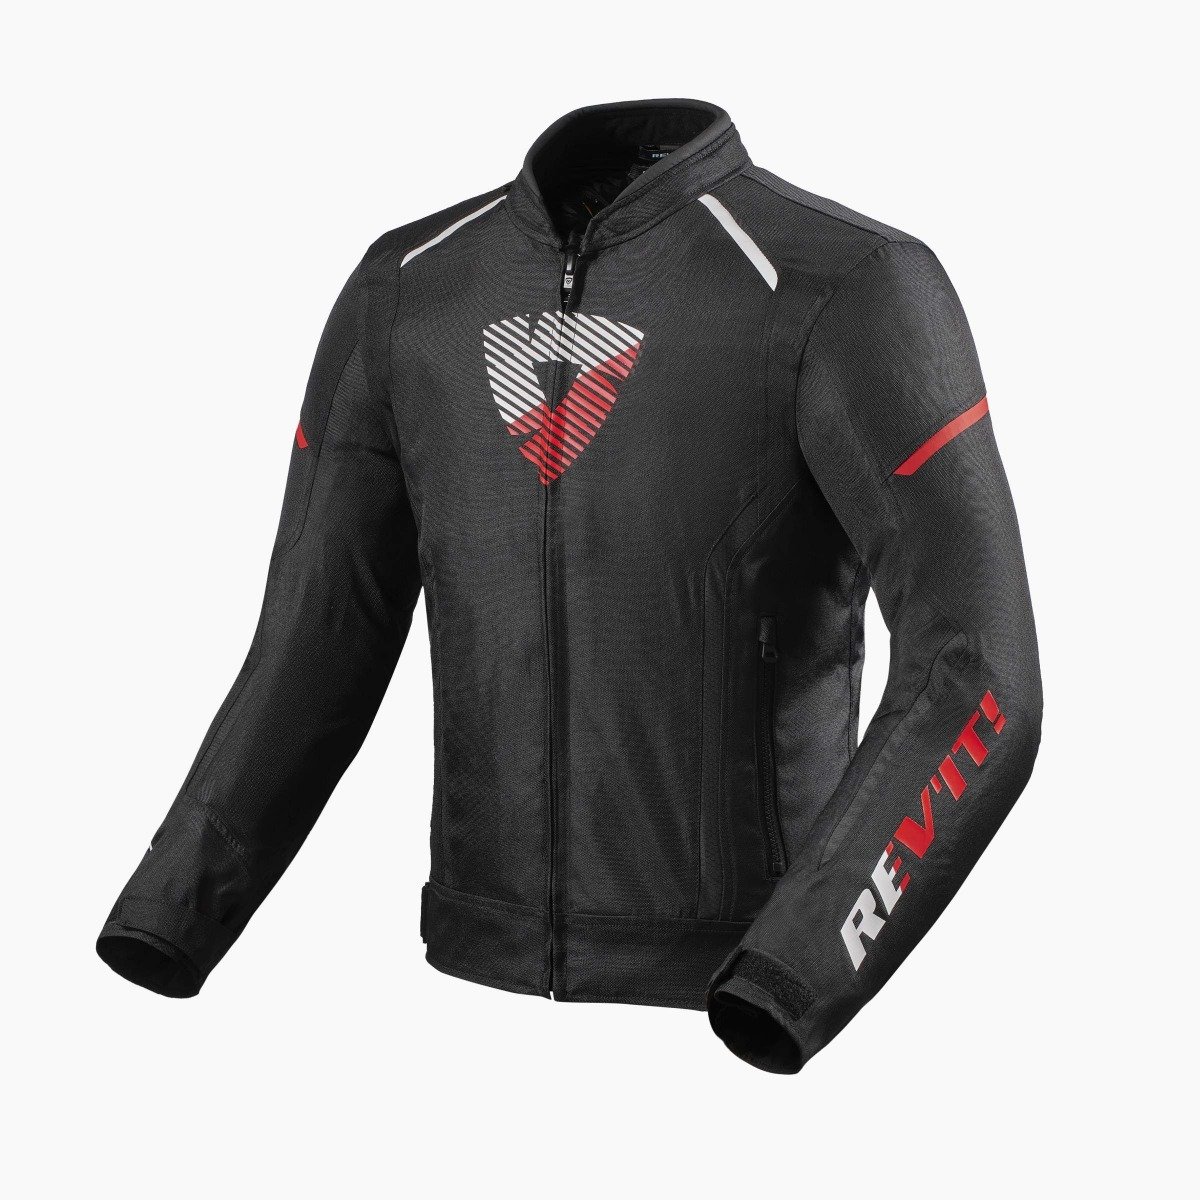 Image of REV'IT! Sprint H2O Jacket Black Neon Red Size M ID 8700001311816